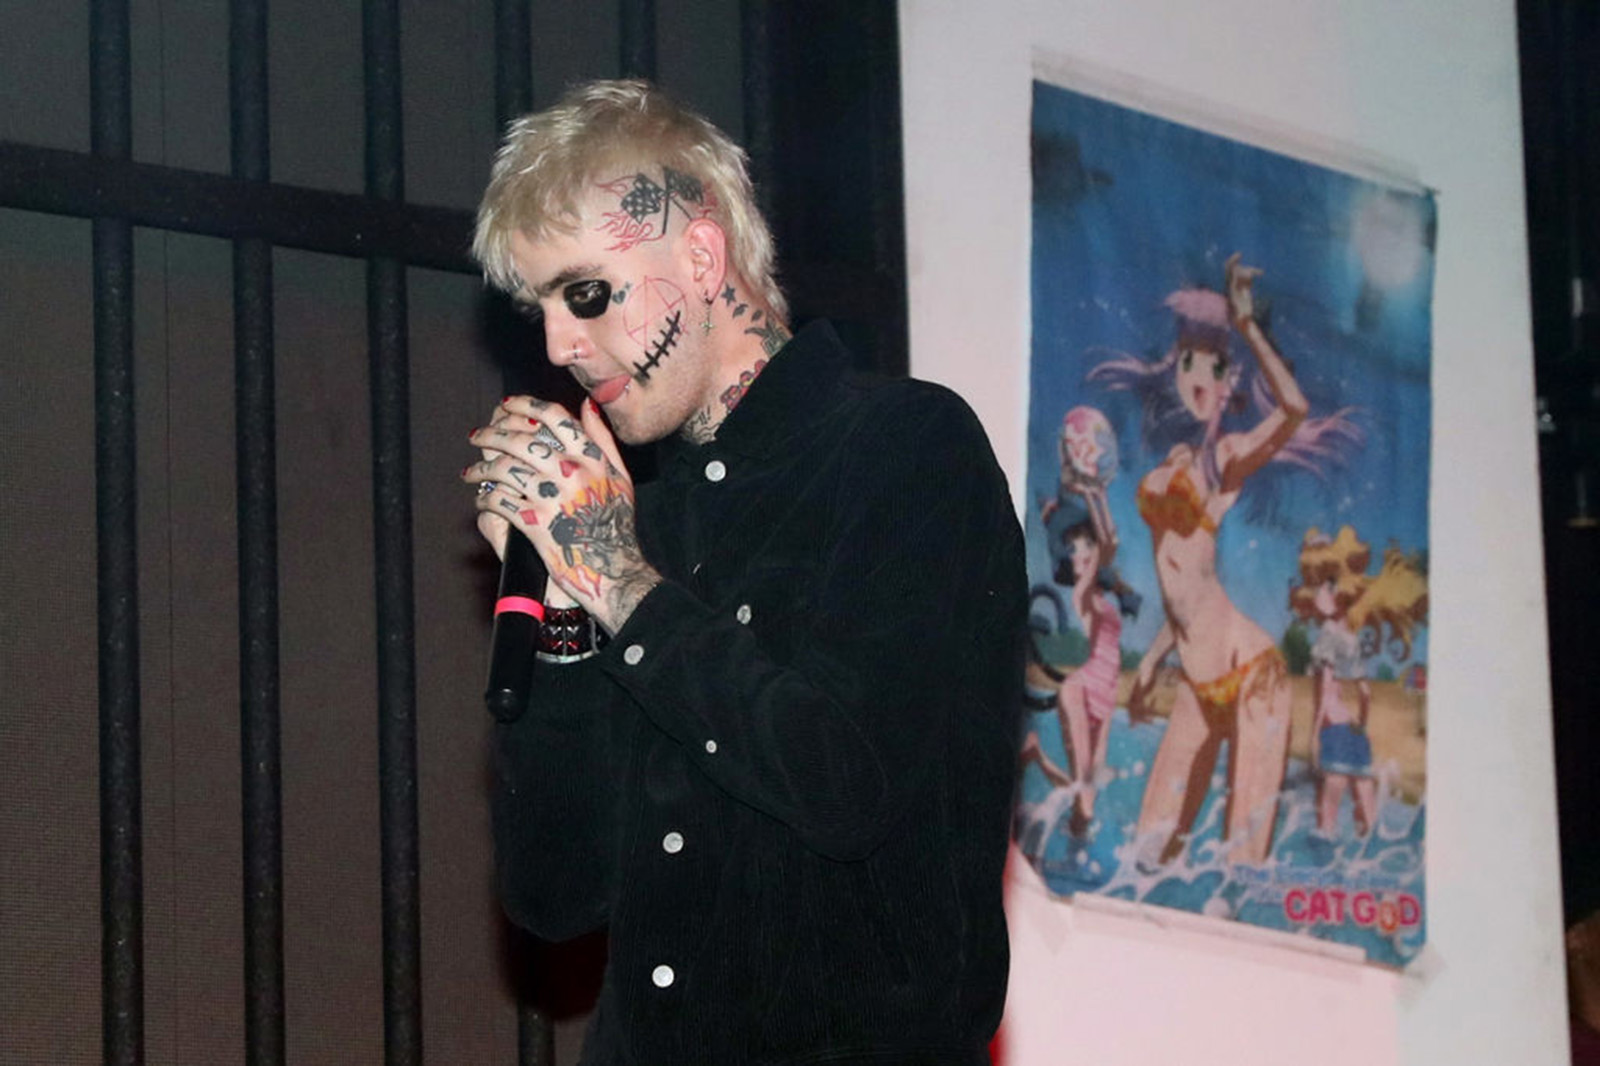 Lil Peep performs at Highline Ballroom on Oct. 31, 2017 in New York City. (Johnny Nunez/WireImage/Getty Images/TNS)